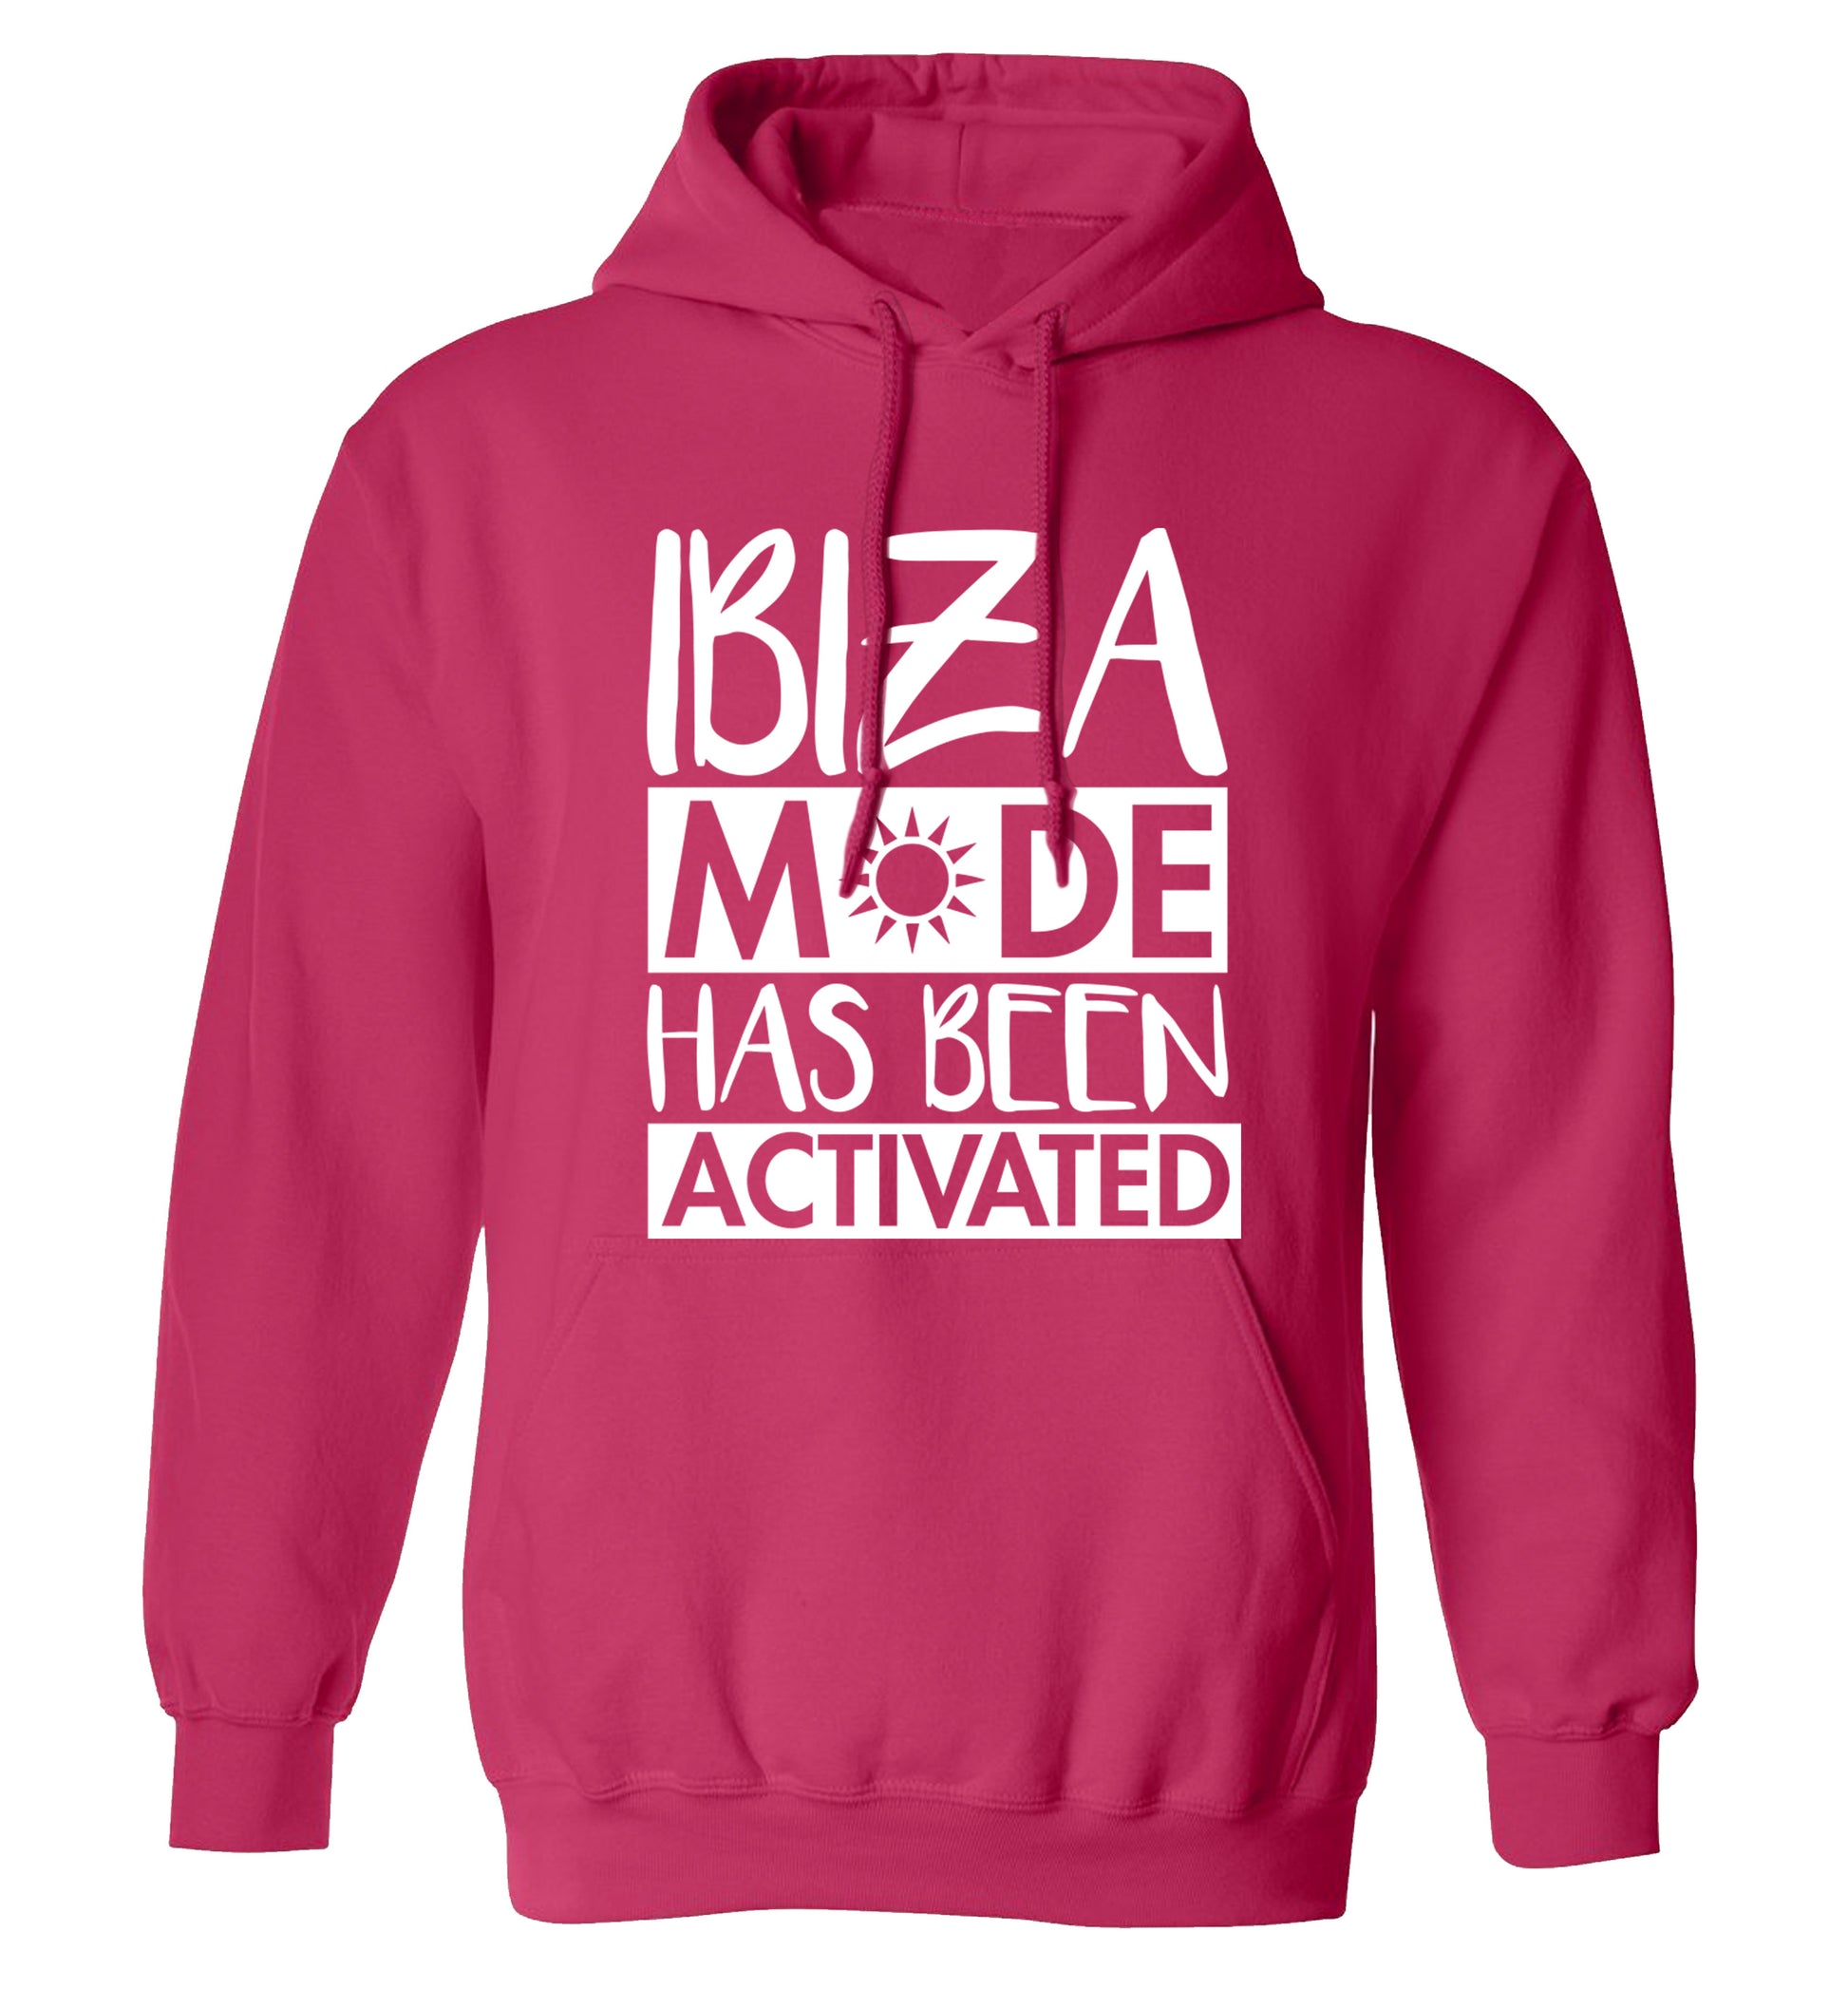 Ibiza mode has been activated adults unisex pink hoodie 2XL